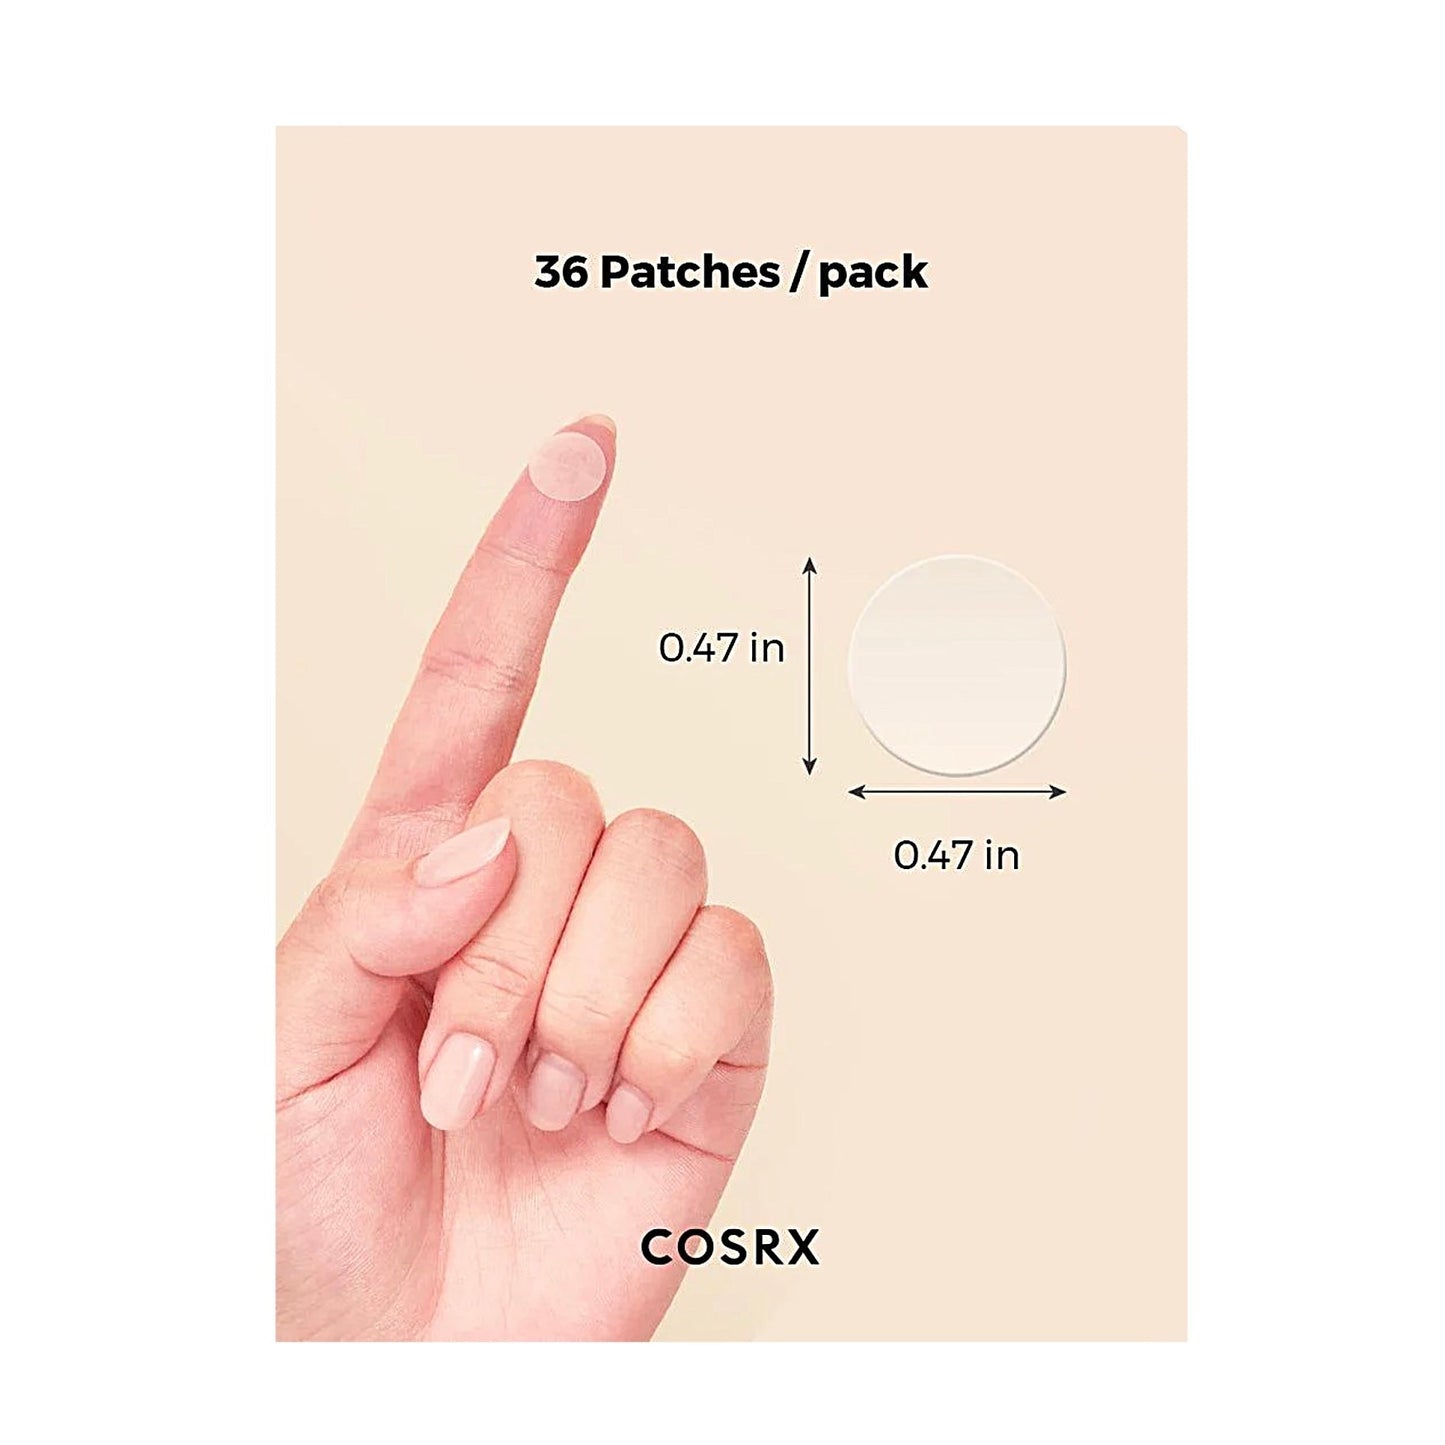 COSRX - Master Patch Basic 90 patches